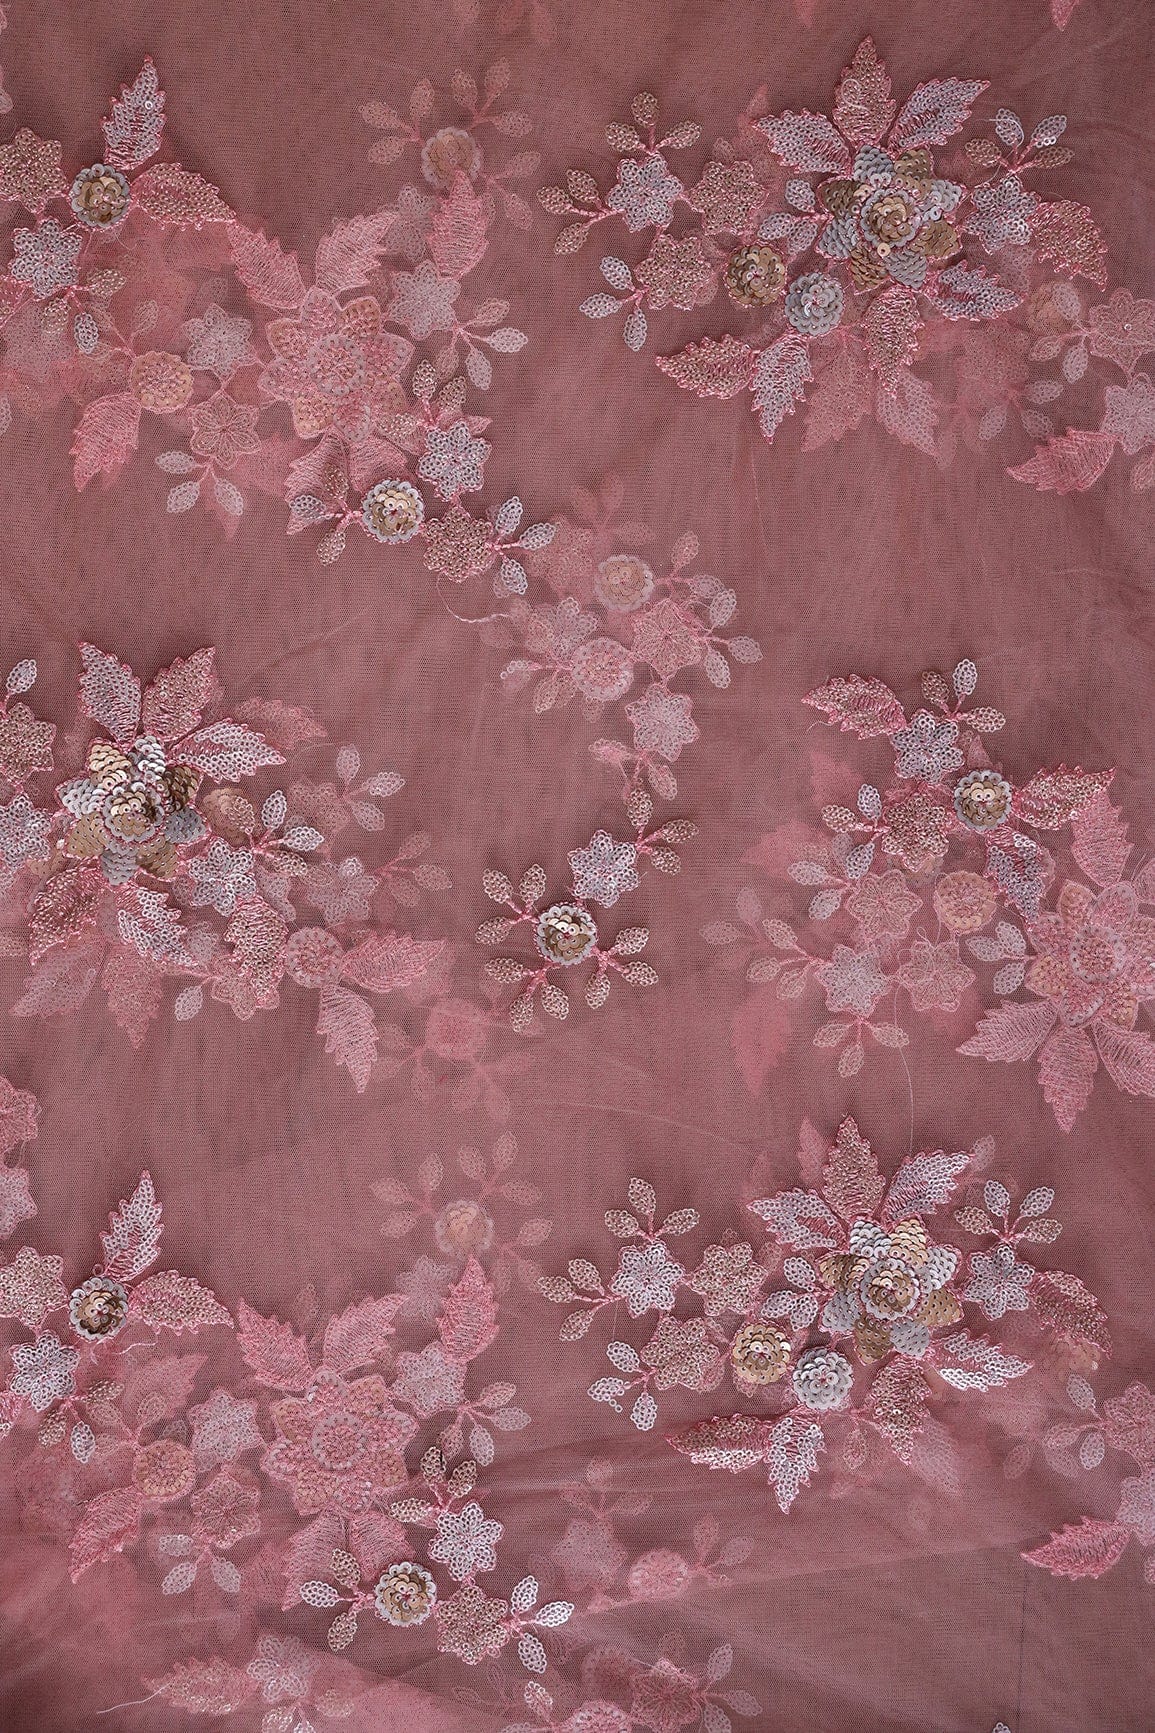 doeraa Embroidery Fabrics 2 Meter Cut Piece Of Gold And Silver Sequins With Pink Thread Floral Embroidery Work On Pink Soft Net Fabric